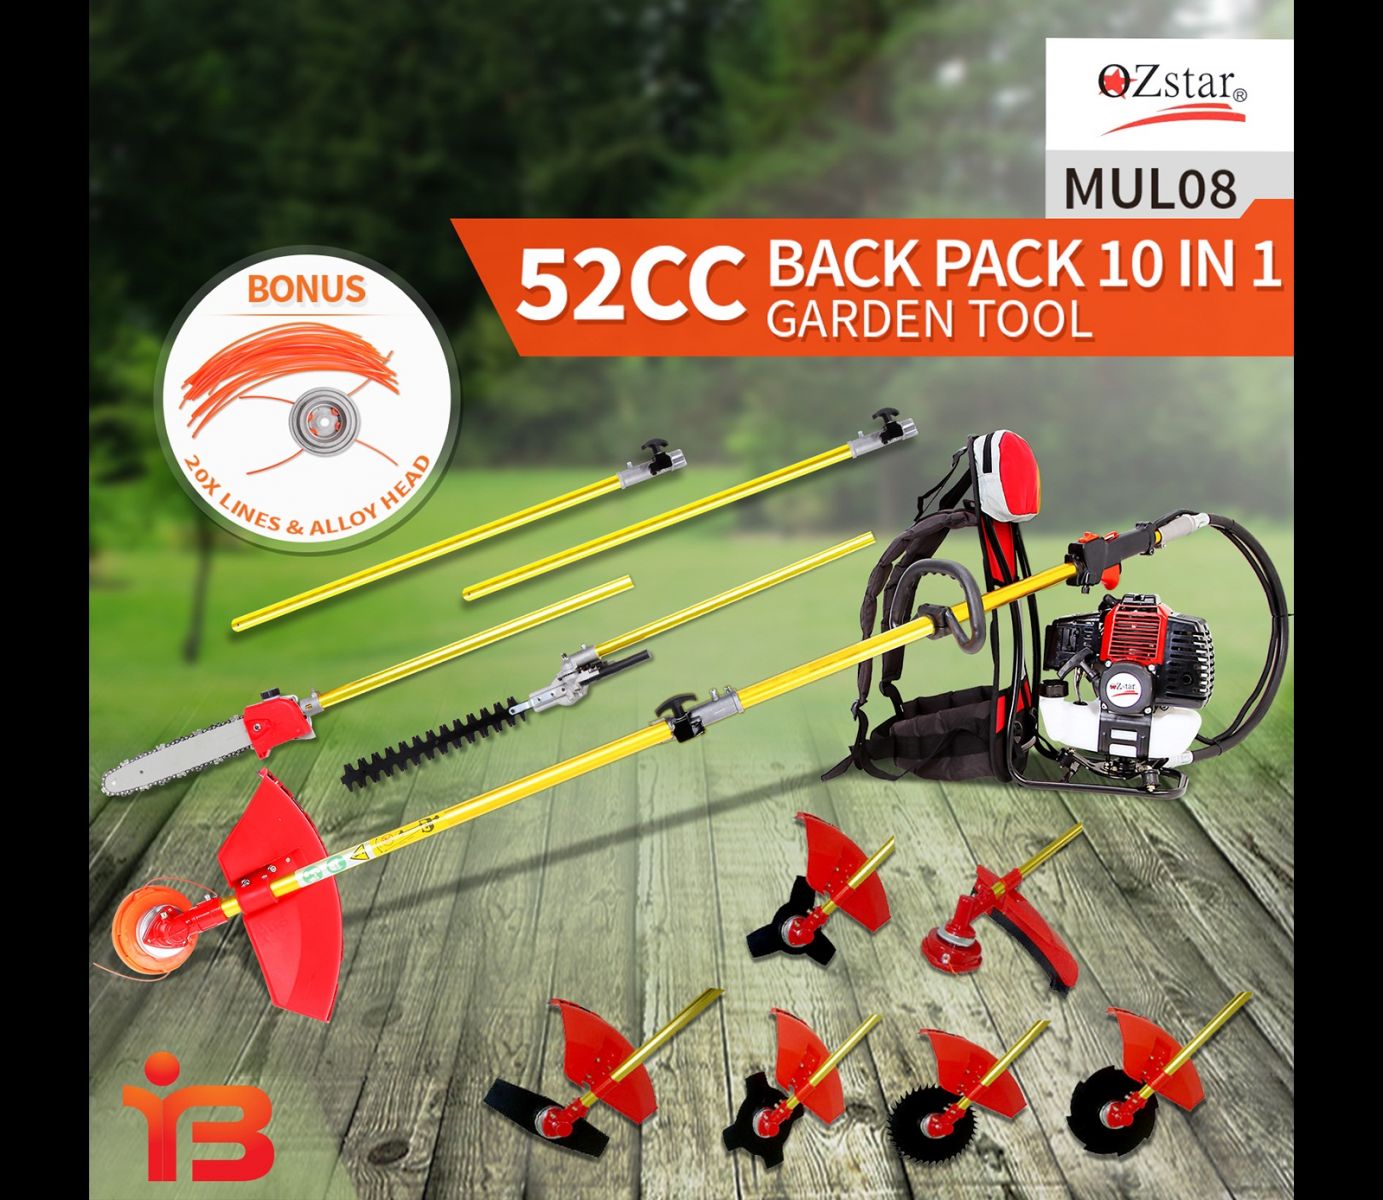 Black Eagle Pole Chainsaw Hedge Trimmer Brush Cutter Whipper Snipper Backpack